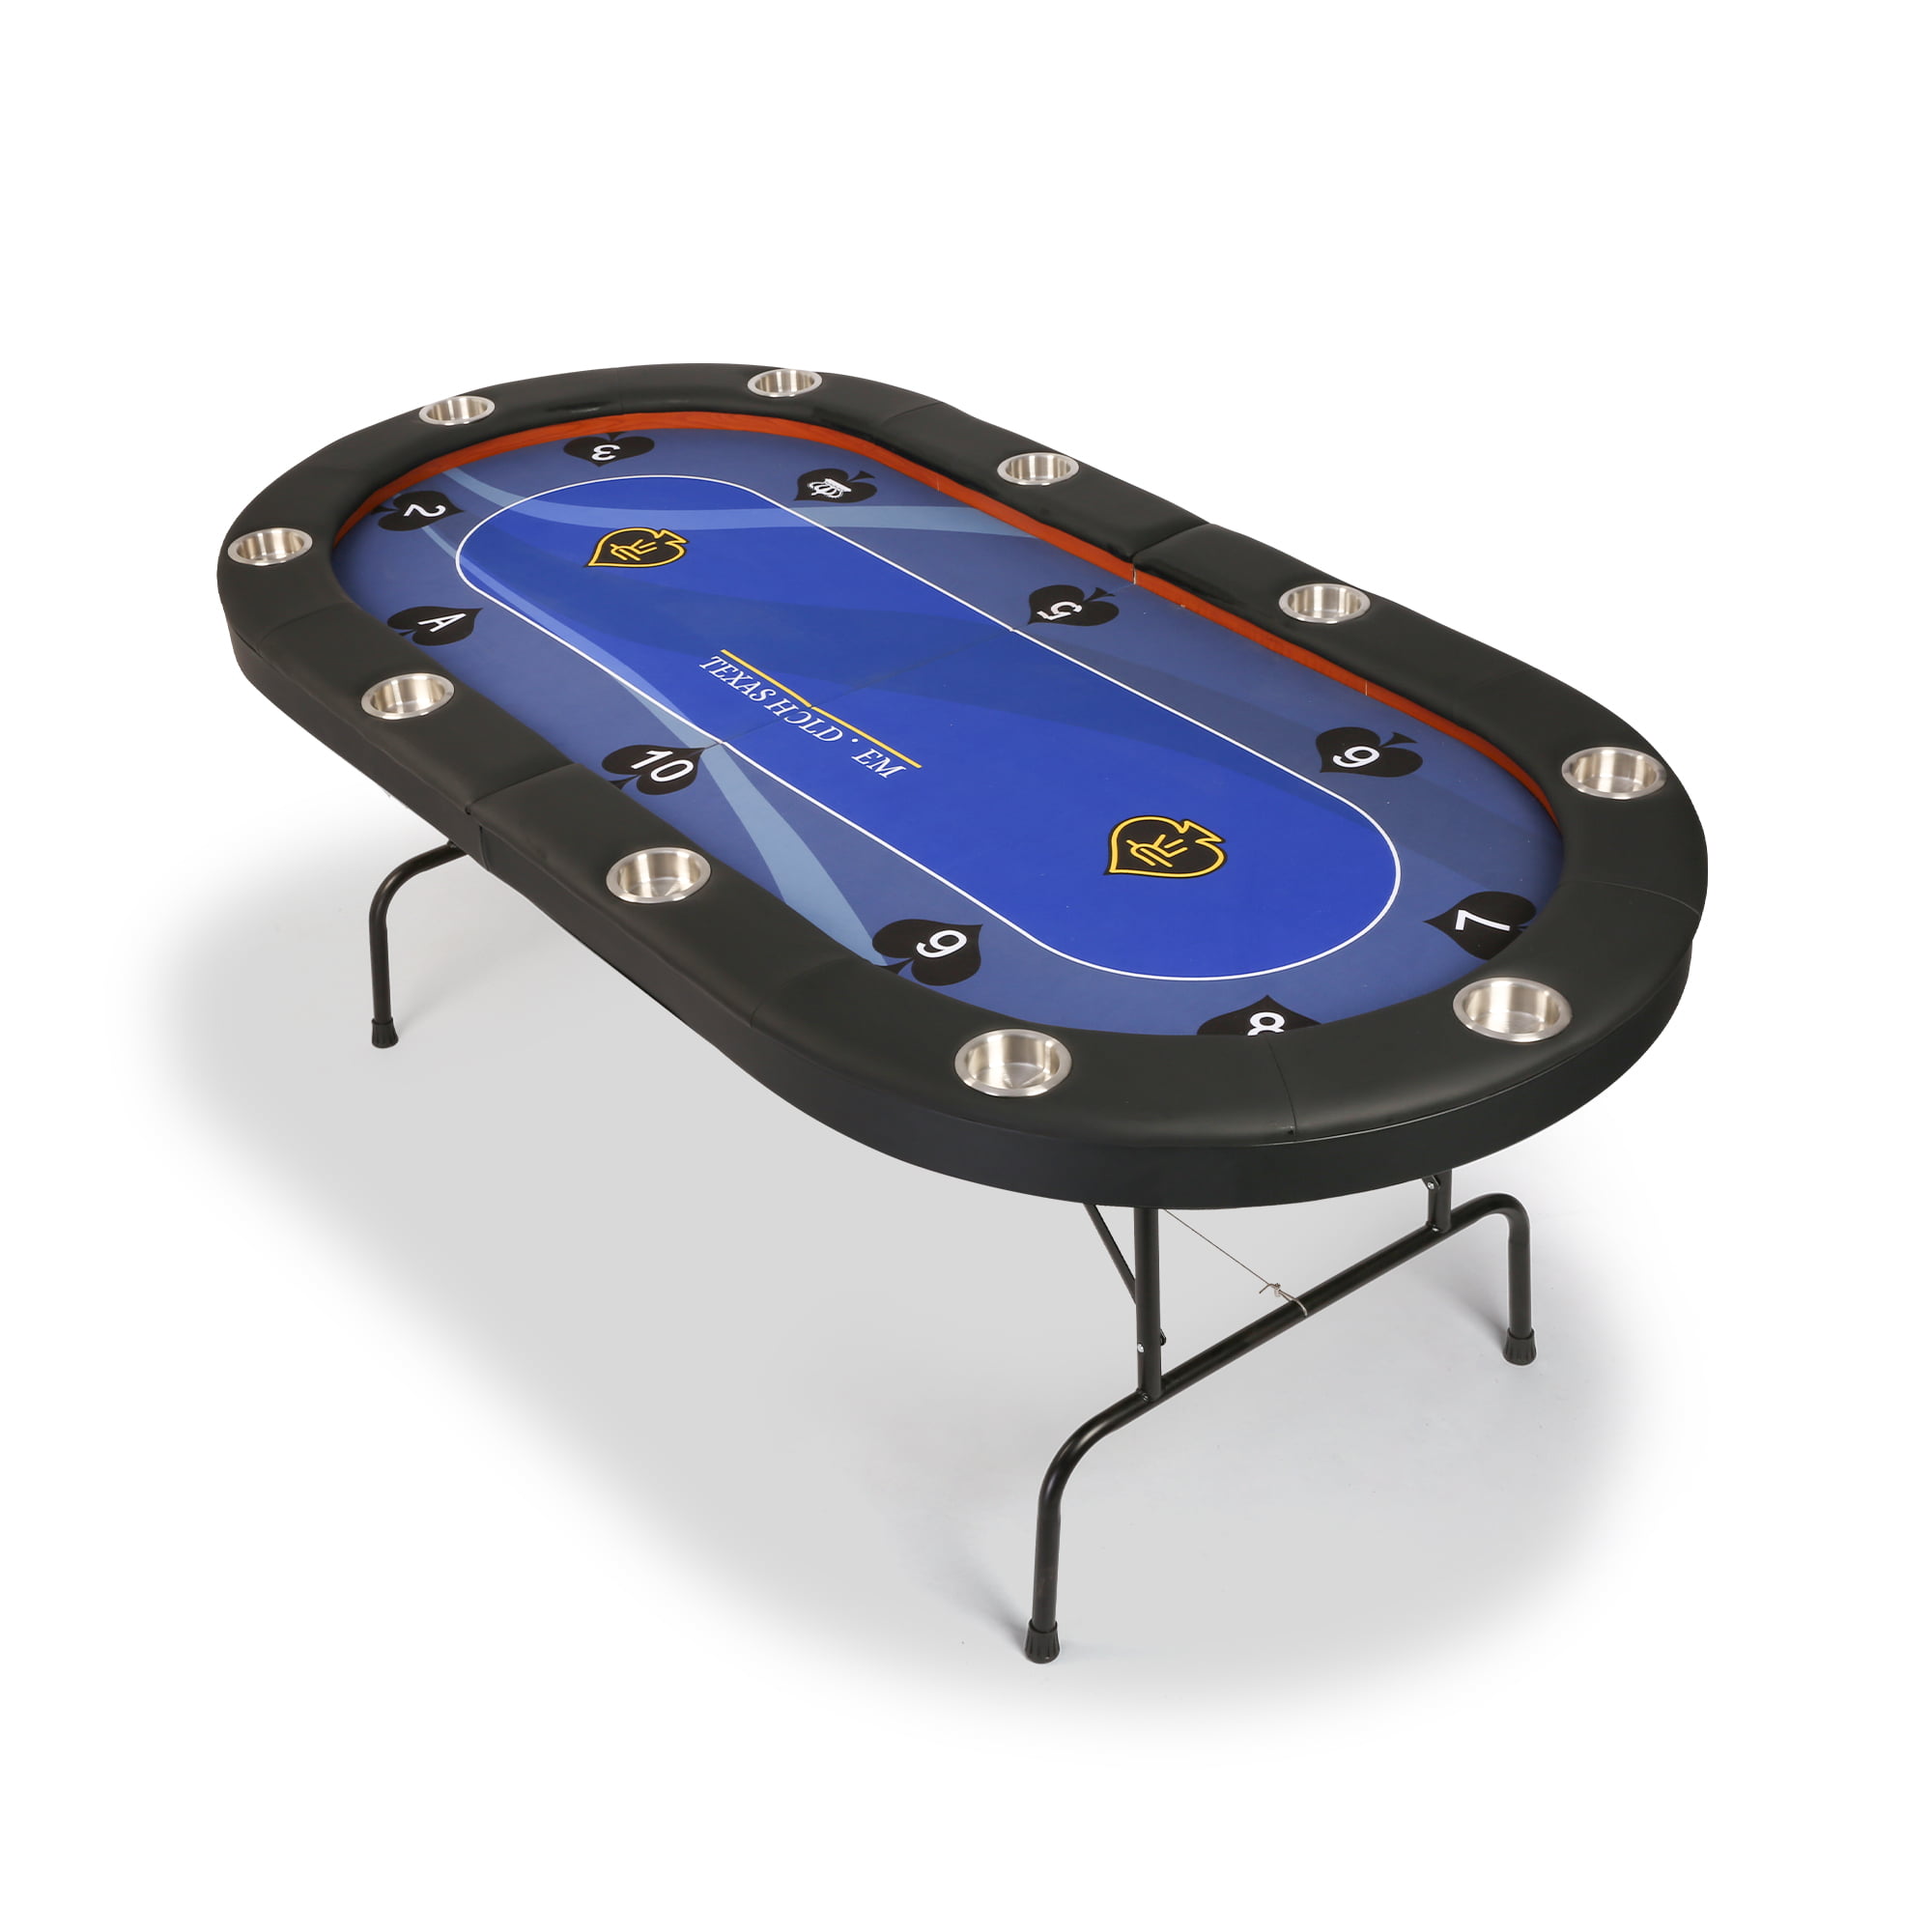 ESPN LED Lights Indoor 10 Play Player Premium Poker Table with In-Laid Desk New 